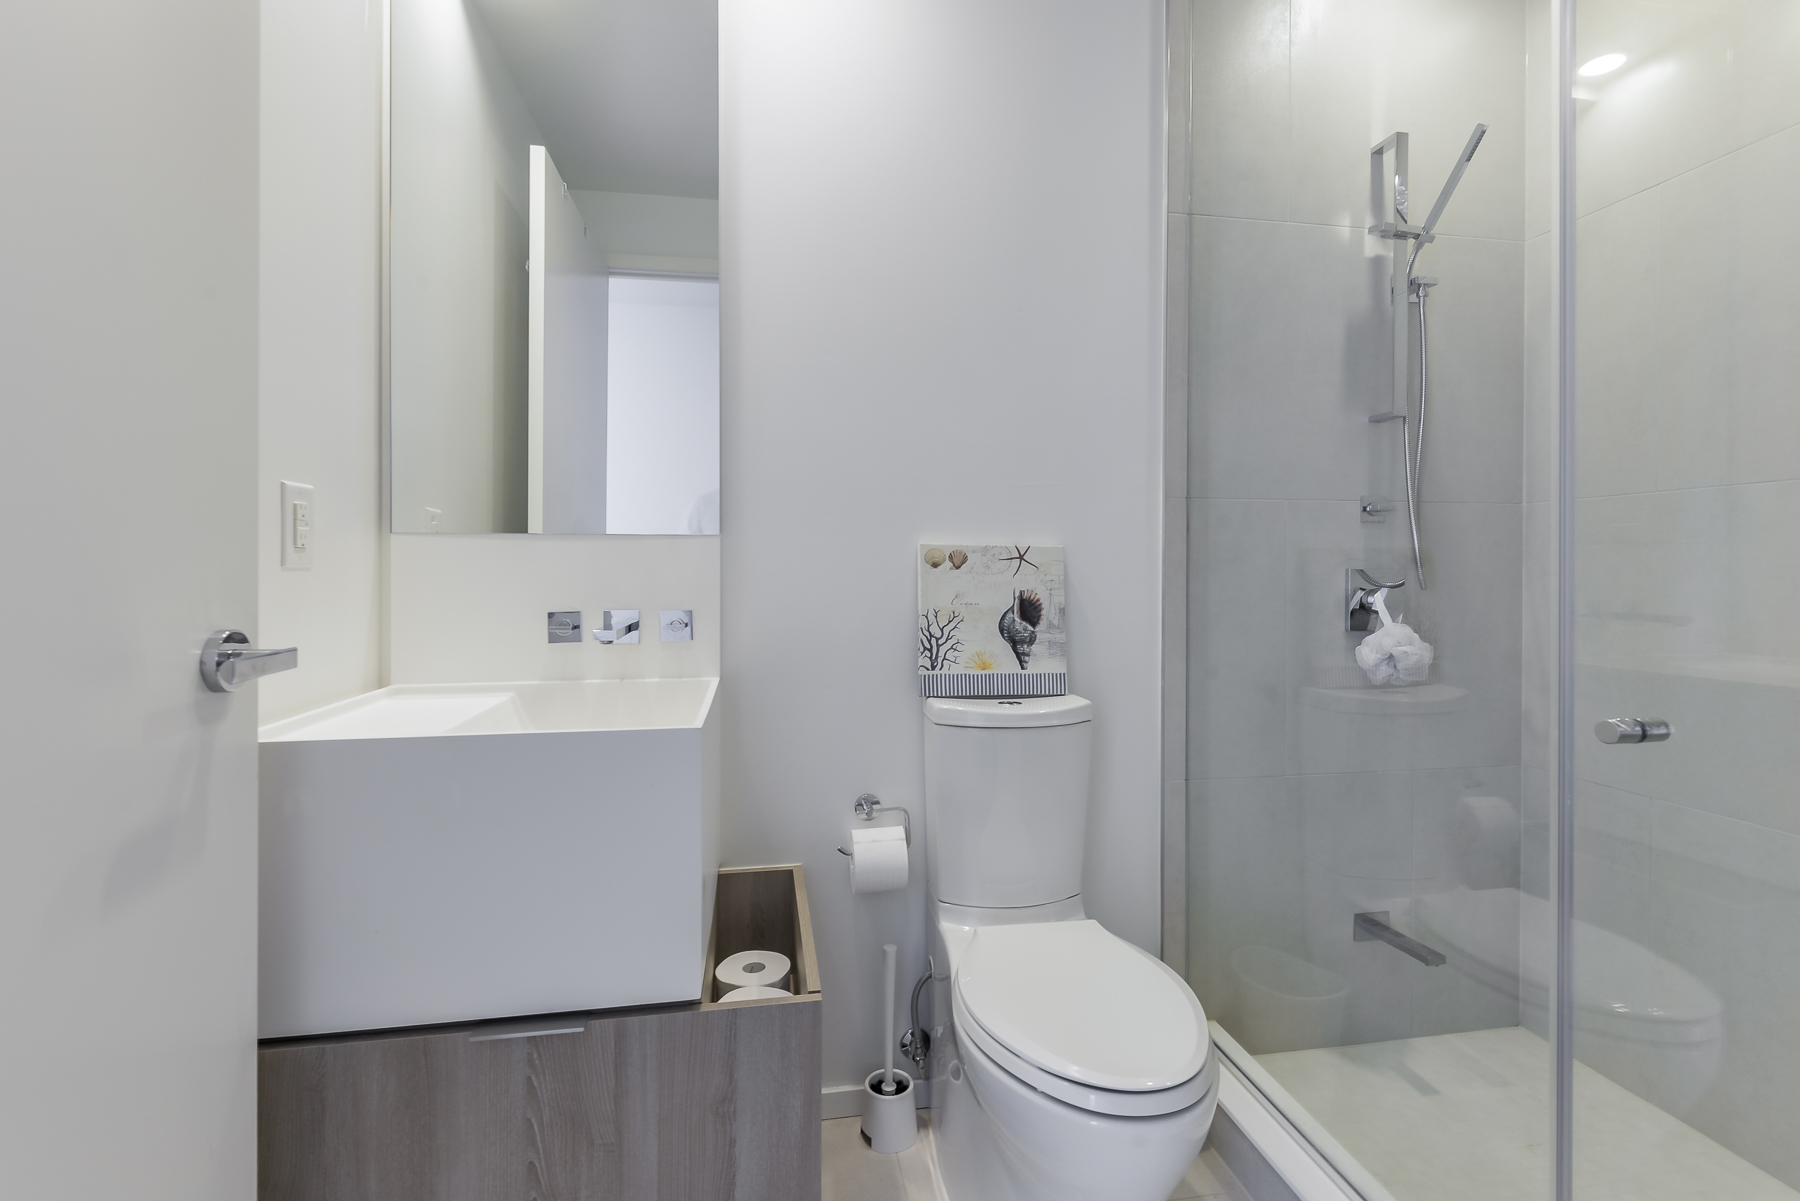 2nd washroom with walk-in shower - 1 Bloor St E Unit 310 Toronto.